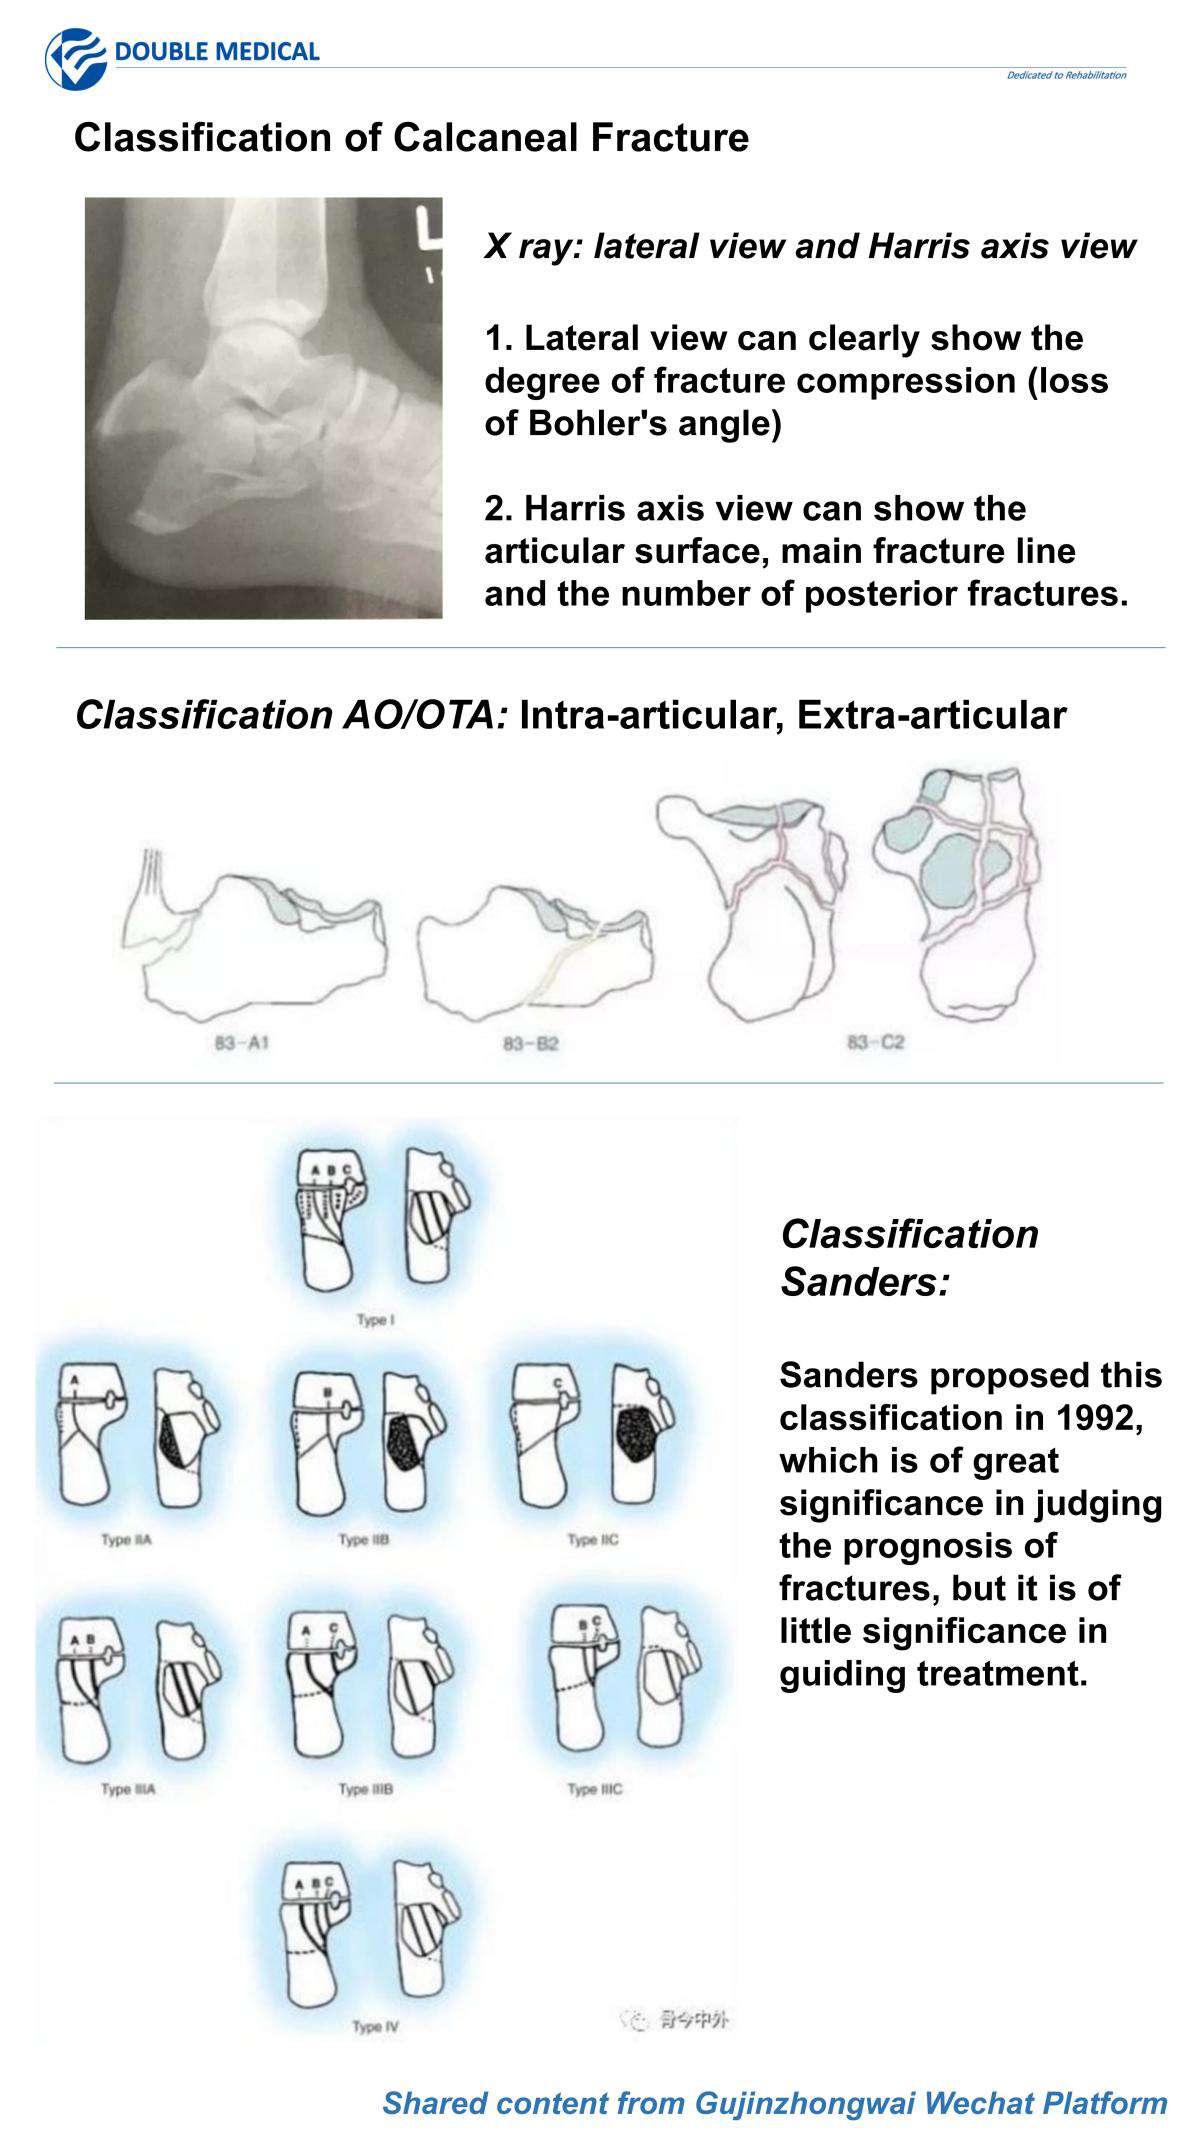  Classification of Calcaneal Fracture